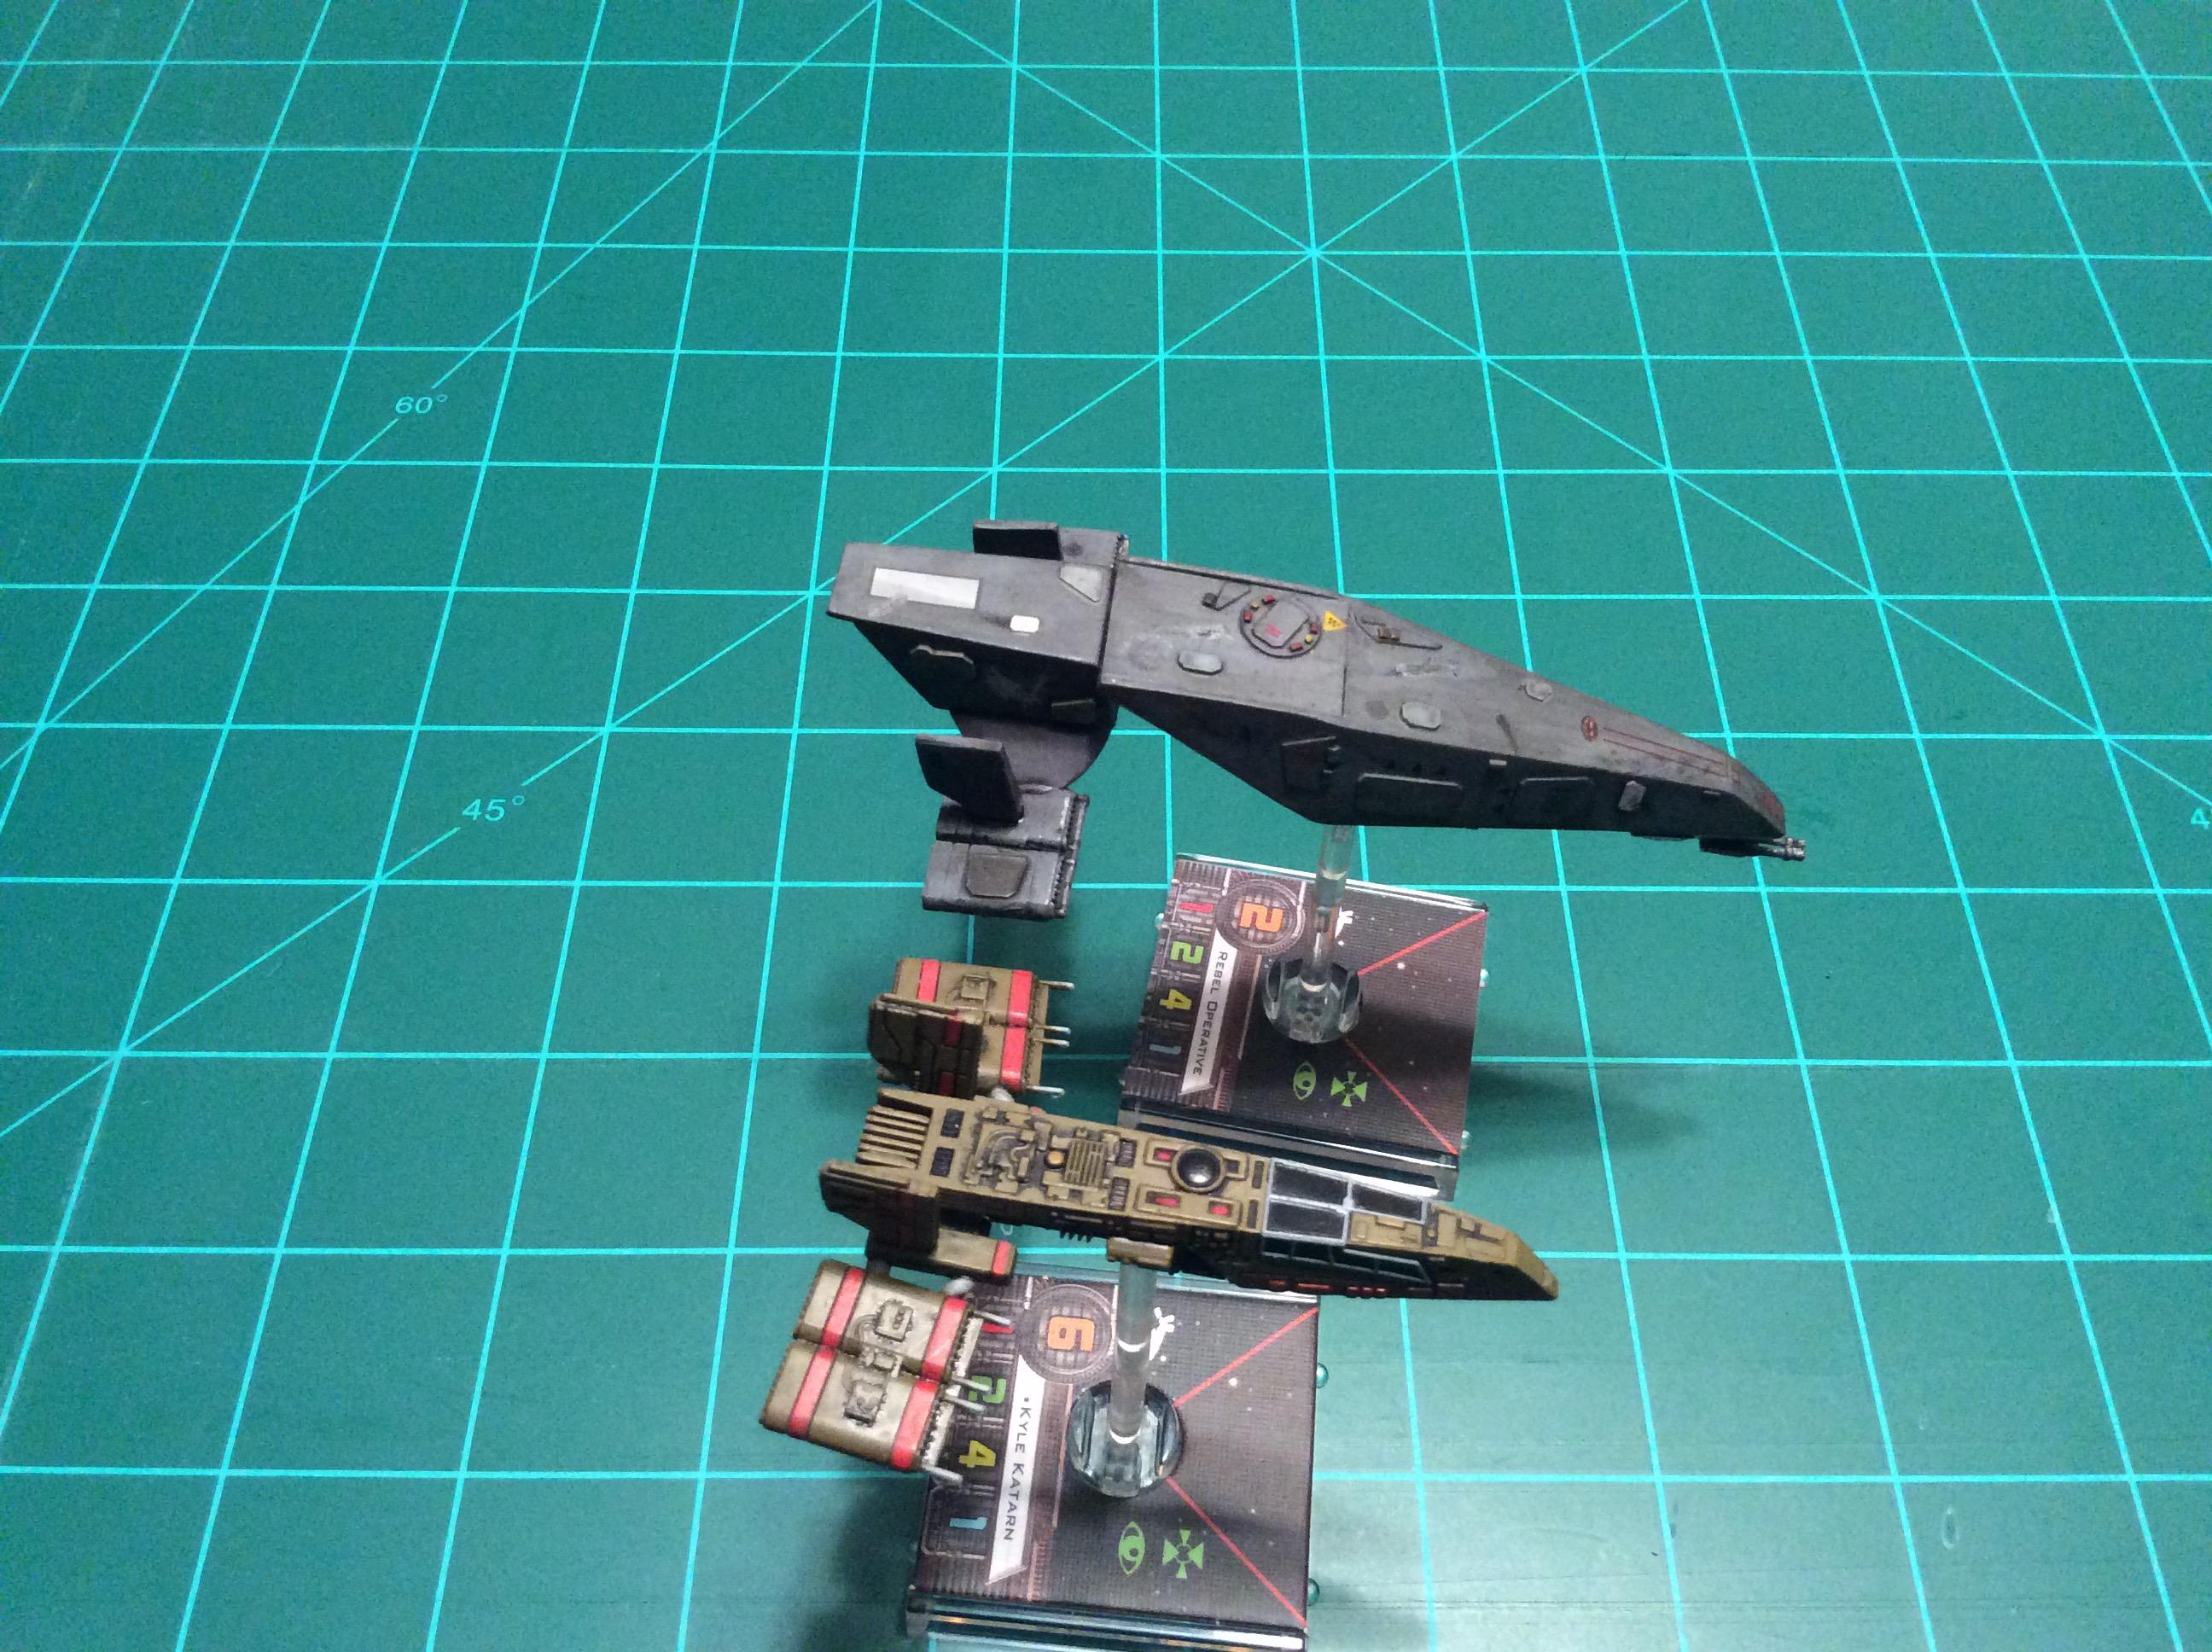 1/270 Scale, Hwk-290, Star Wars, X-wing Miniatures Game